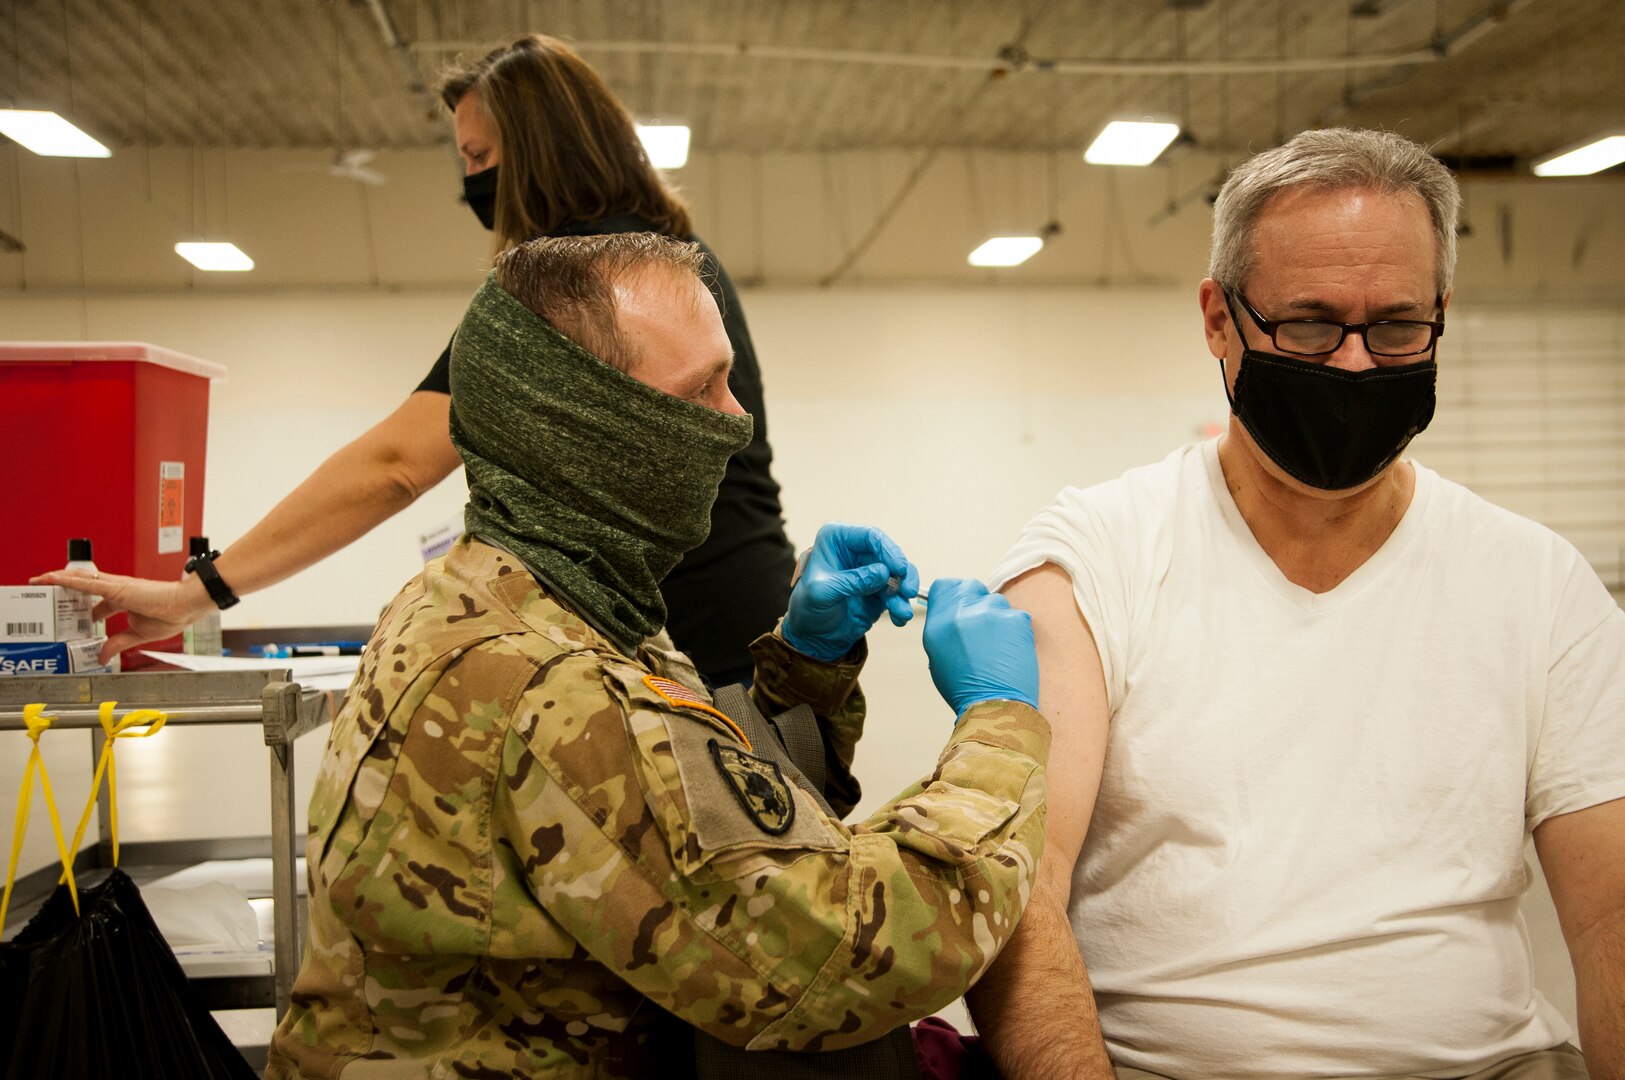 Nebraska National Guard Staff Sgt. Brad Wardyn, a flight medic with Company G, 2-104th General Support Aviation Battalion, administers the COVID-19 vaccine to Tom Kent, the resident and CEO for the Nebraska Public Power District, Jan. 21, 2021, in Columbus, Nebraska.